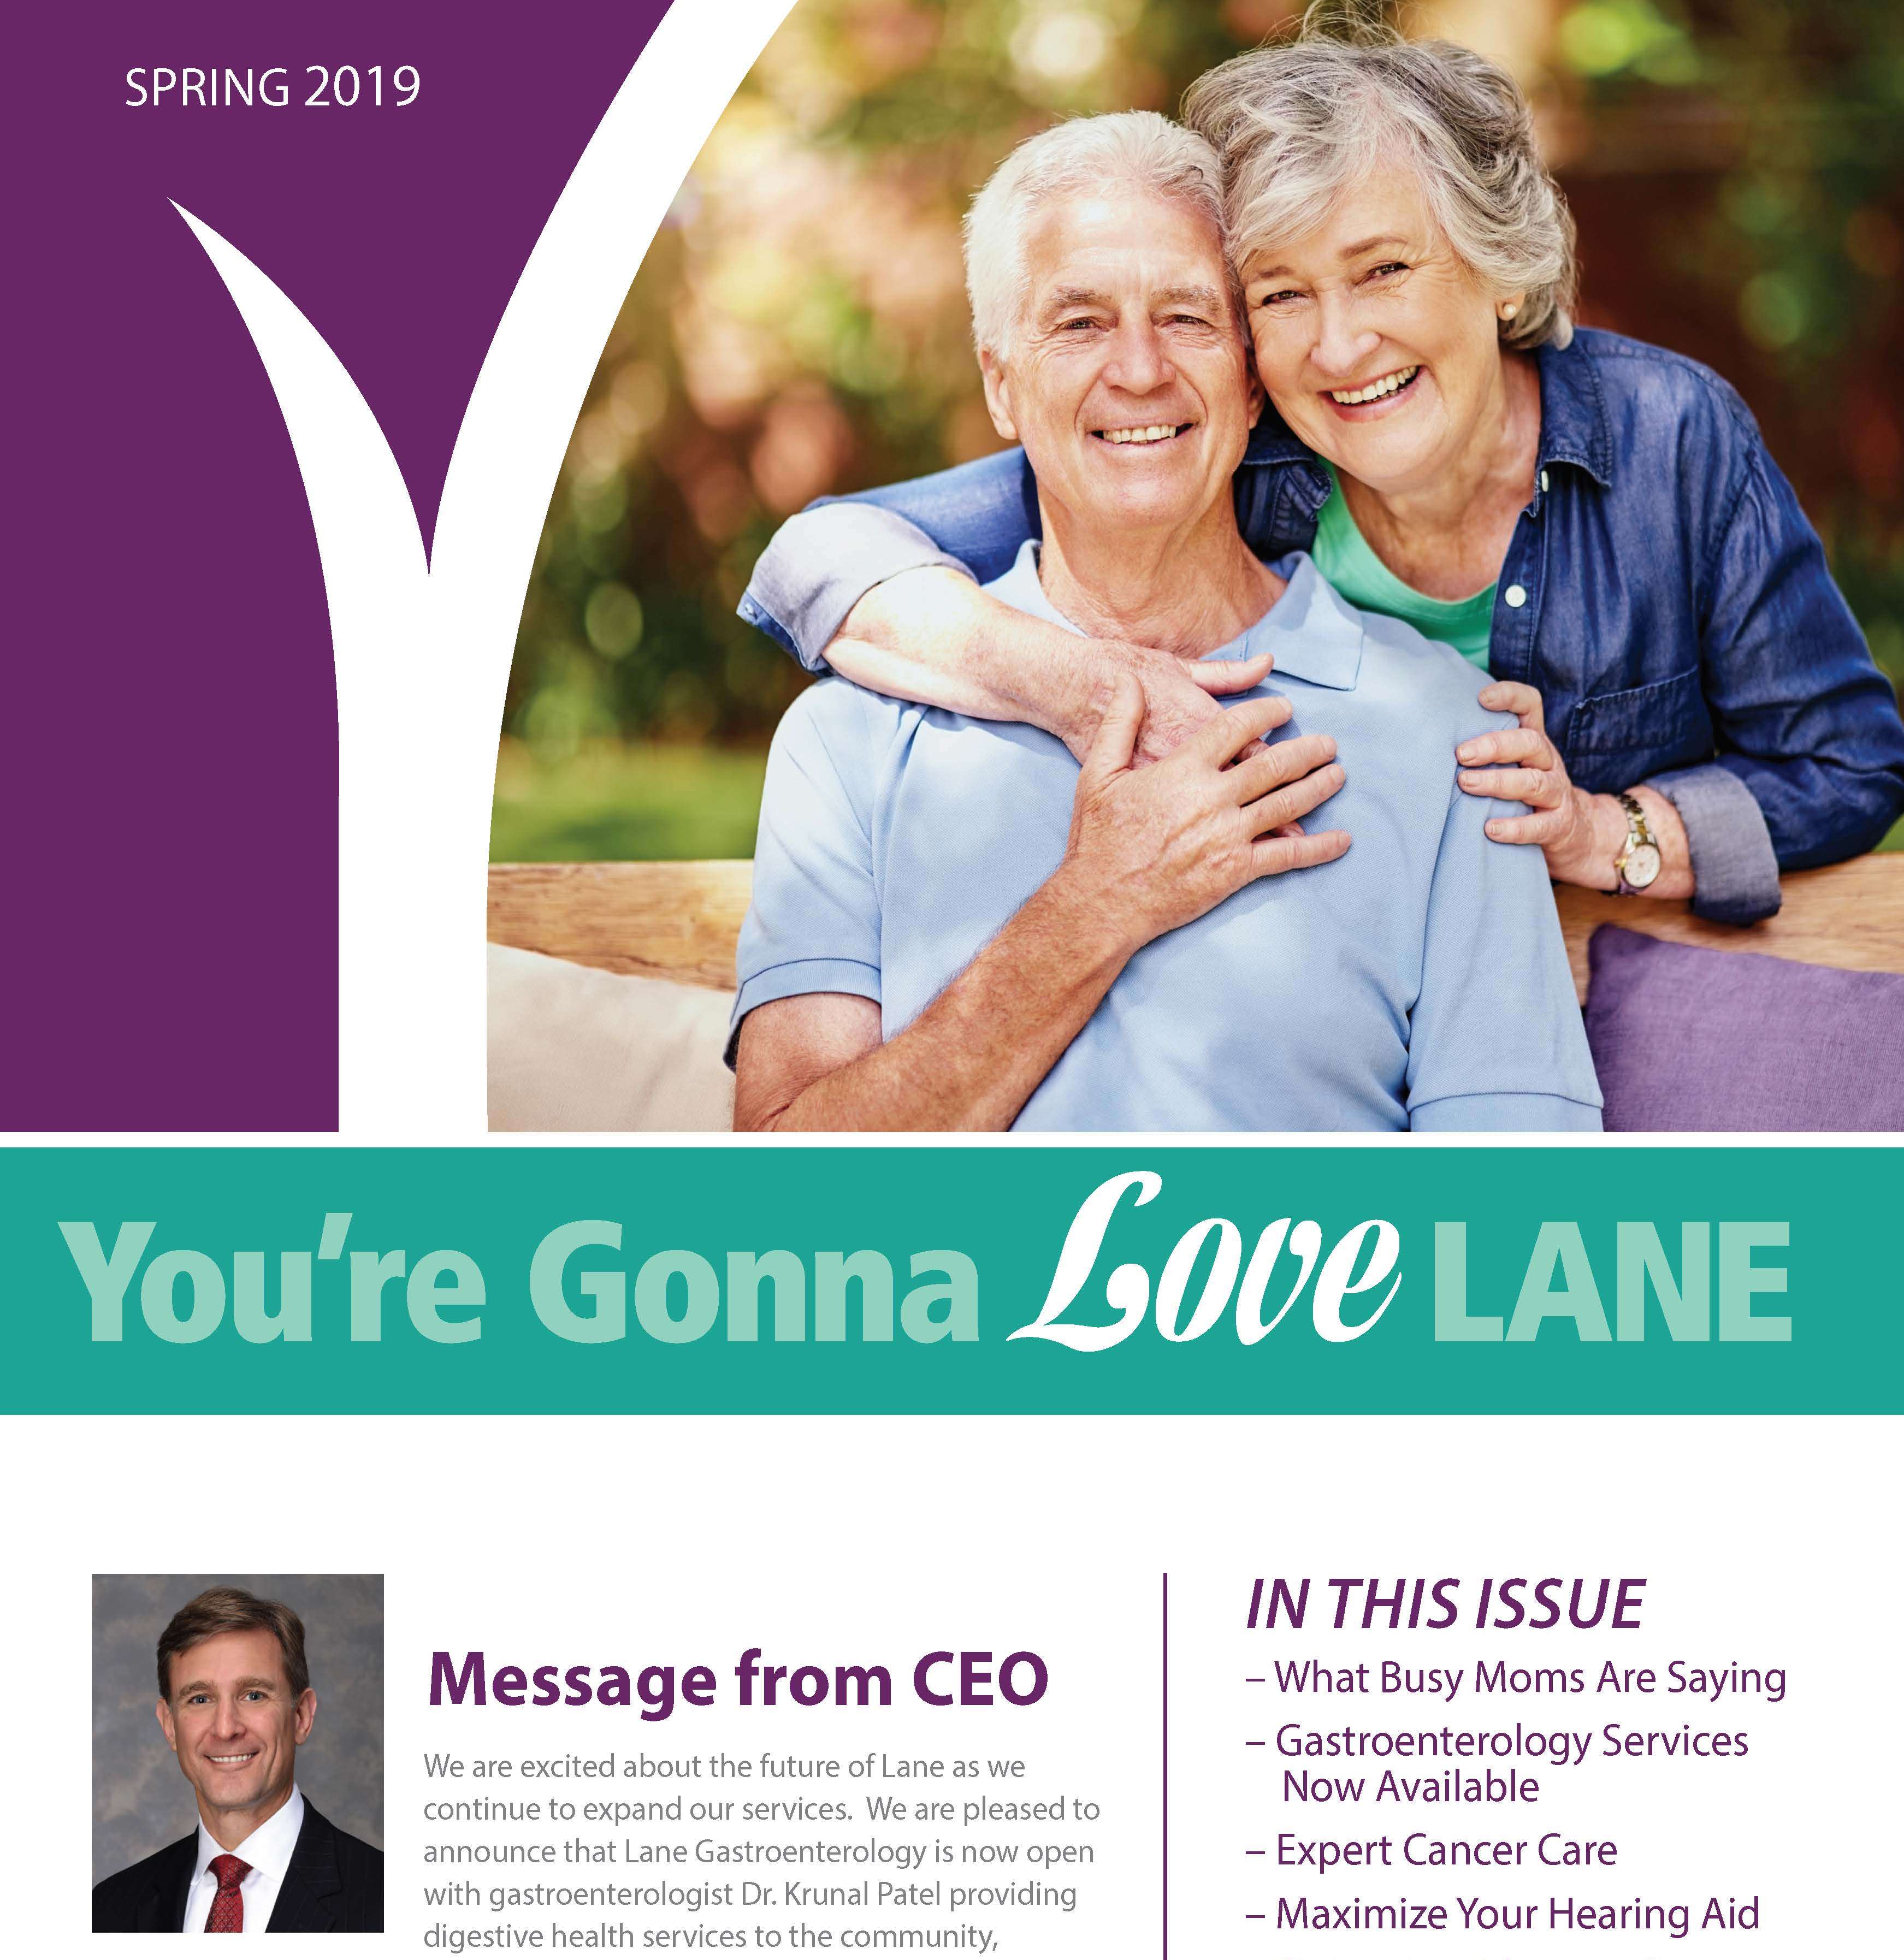 LRM-037-19-Spring Magazine (3-27-19) pages_Page_1